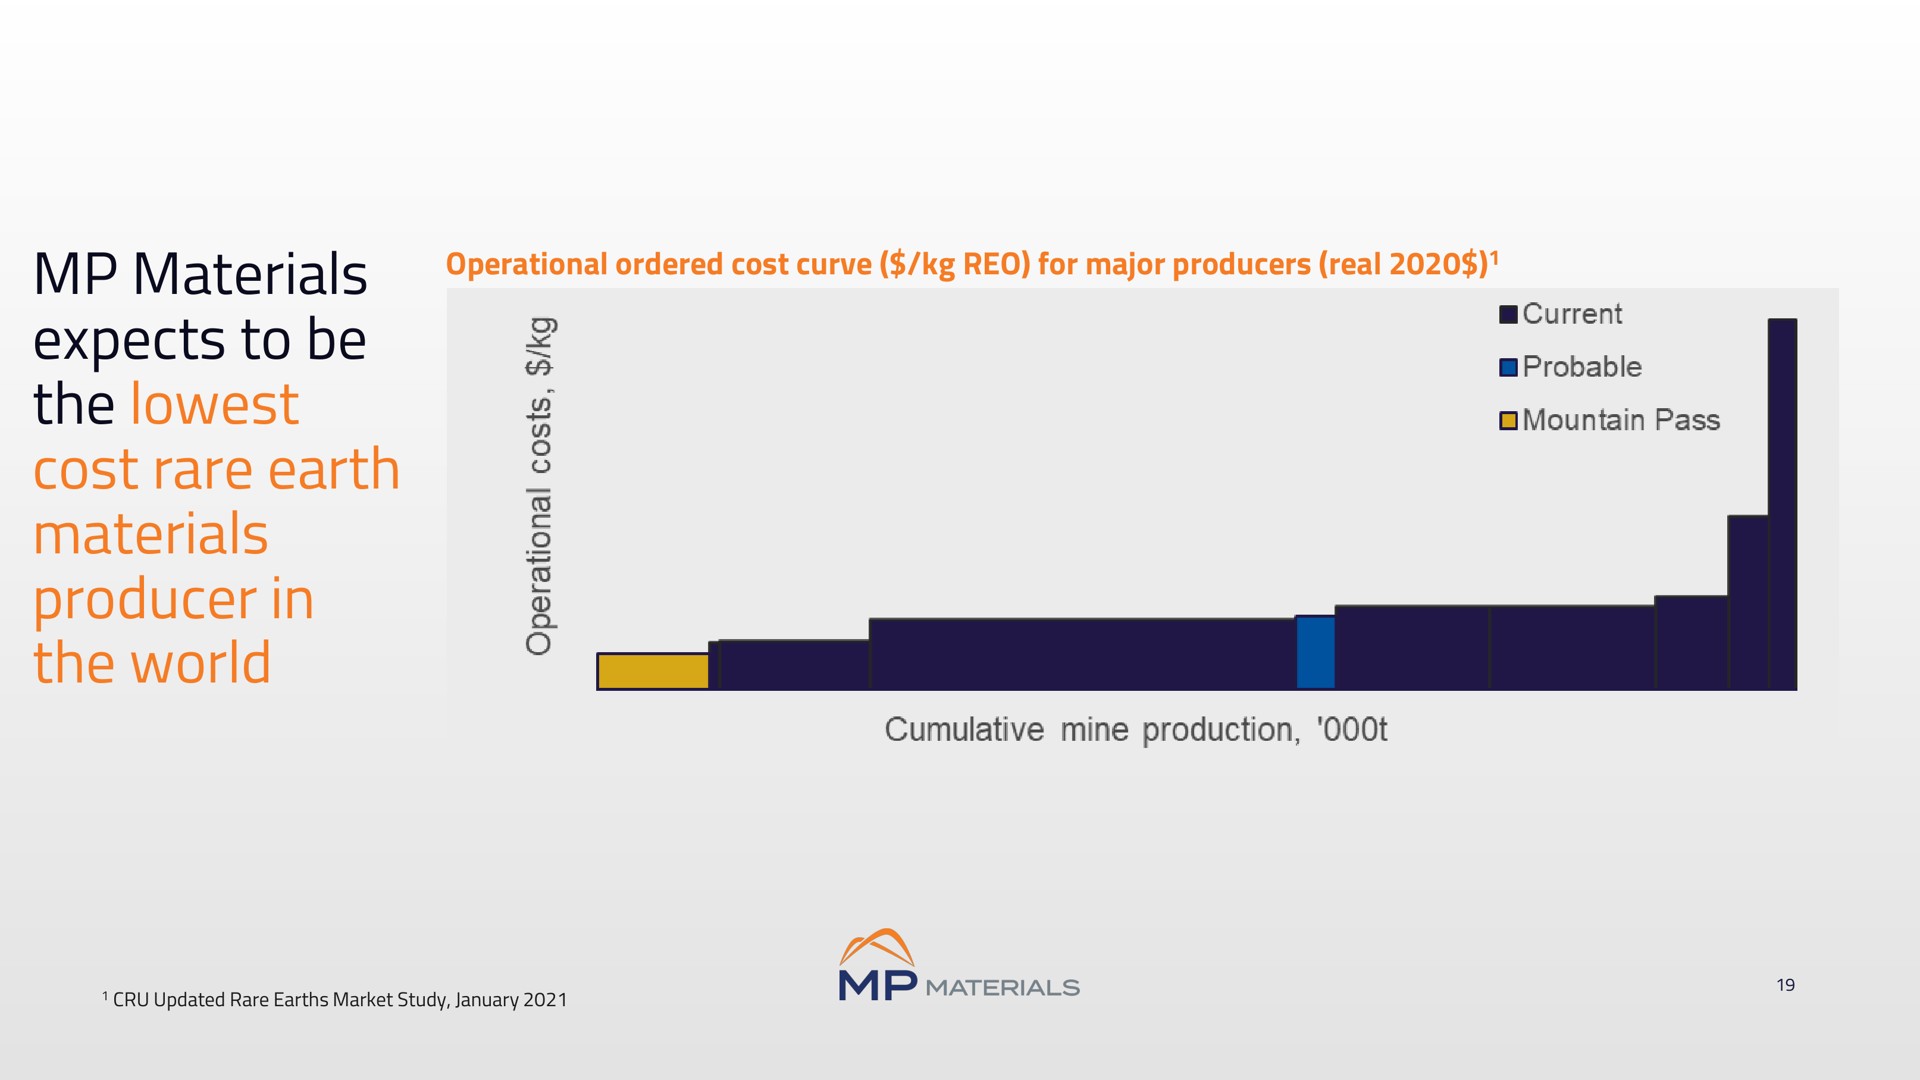 materials expects to be the cost rare earth materials producer in the world | MP Materials